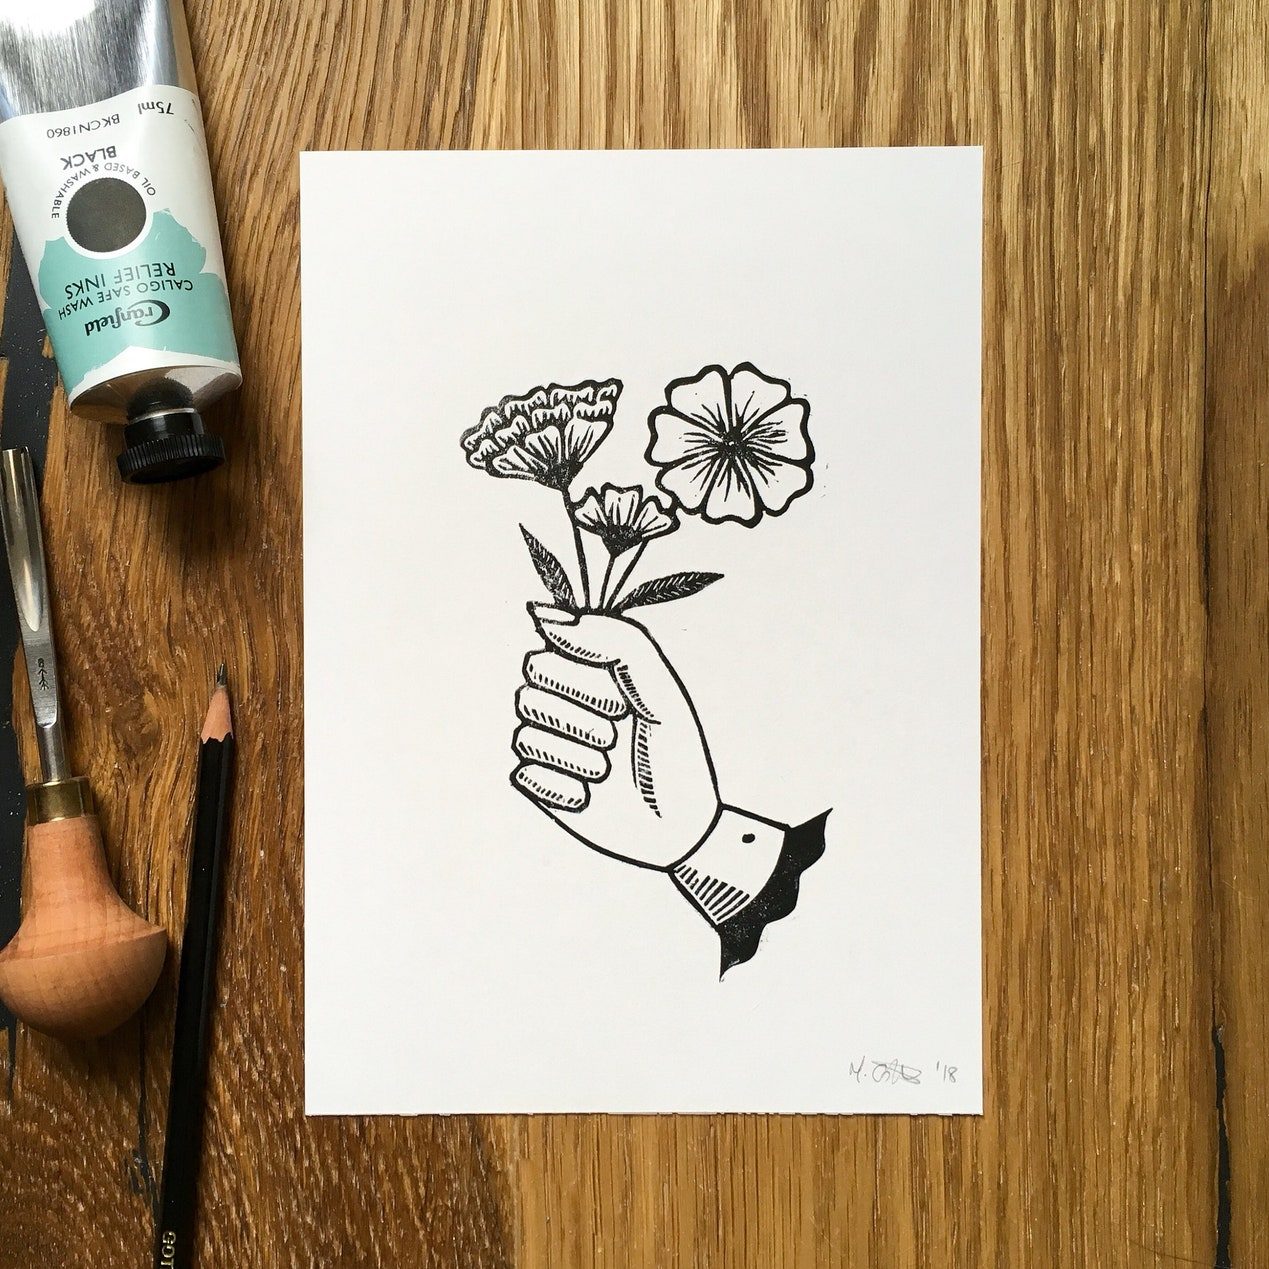 Linoprint of a hand clutching a small posey of flowers